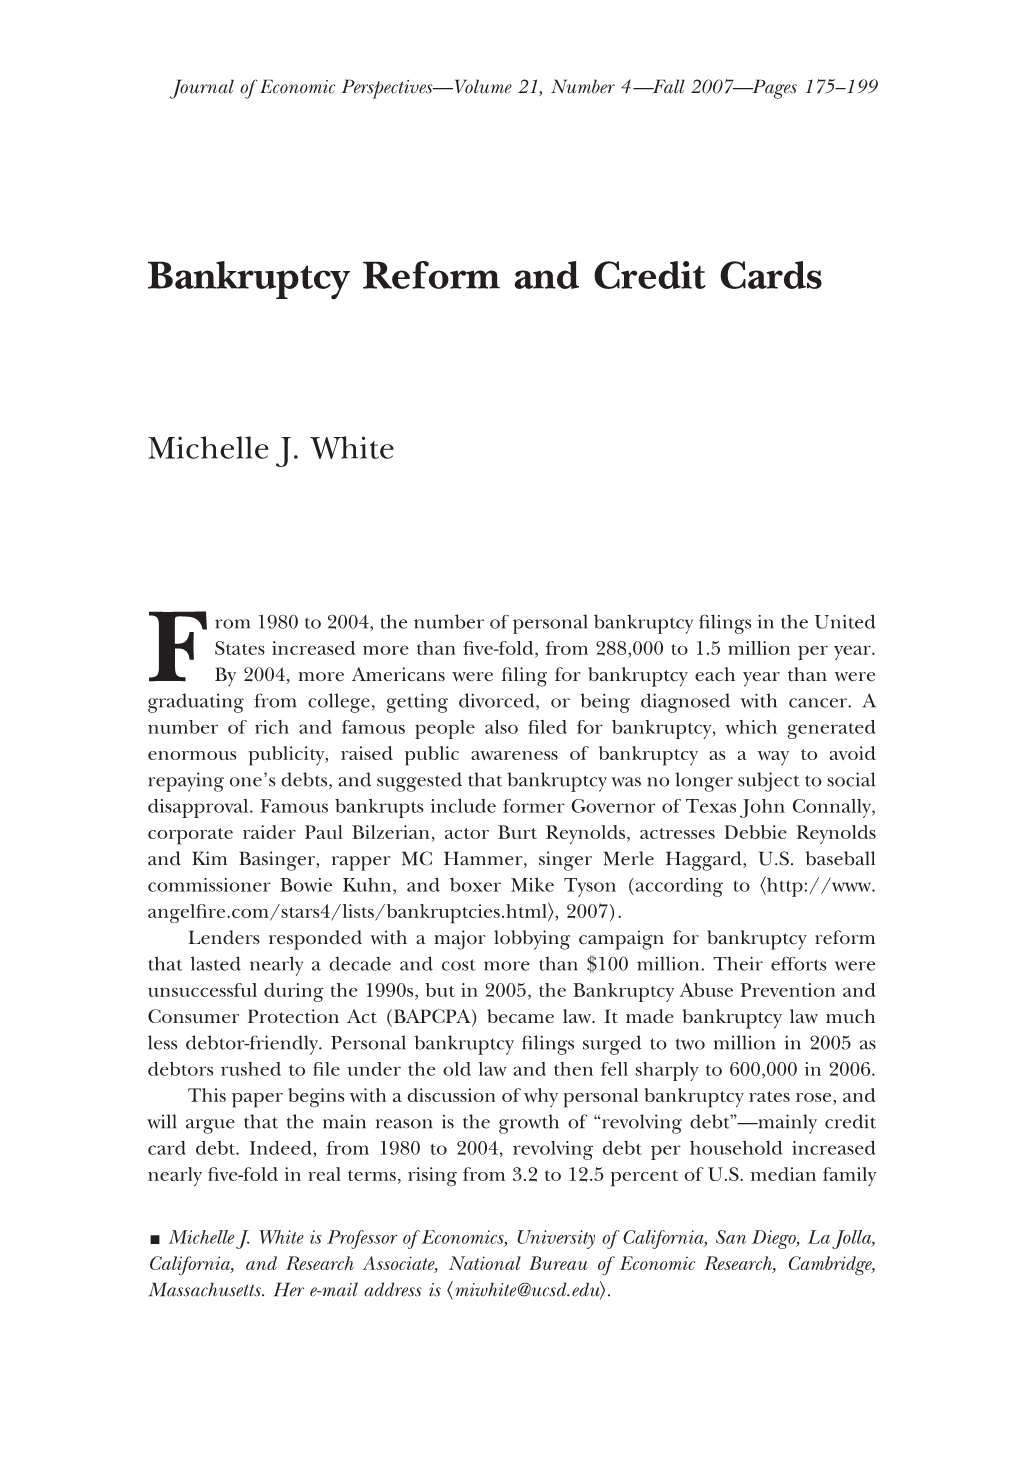 Bankruptcy Reform and Credit Cards